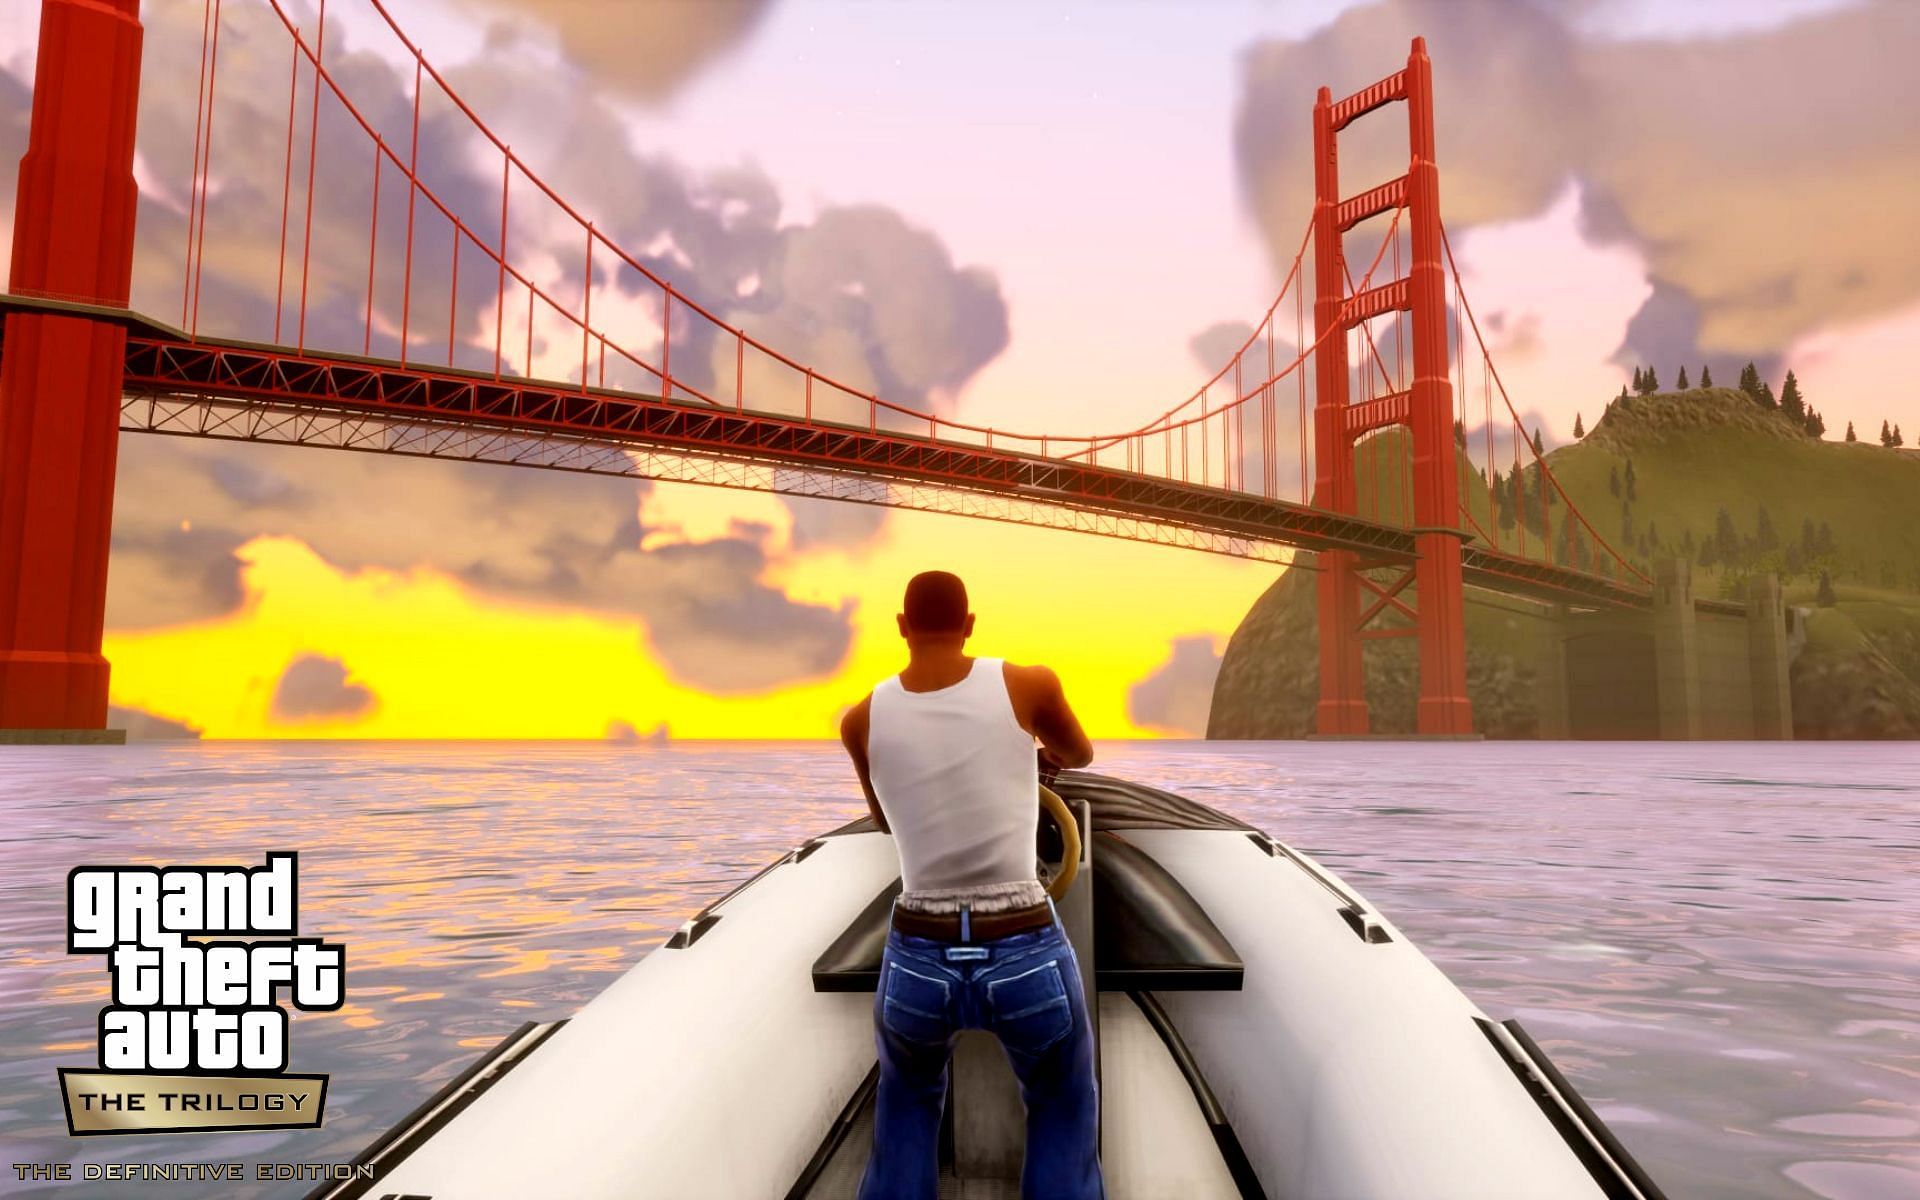 GTA Trilogy Definitive Edition receives patch 1.05 with huge list of changes (Image via Rockstar Games)